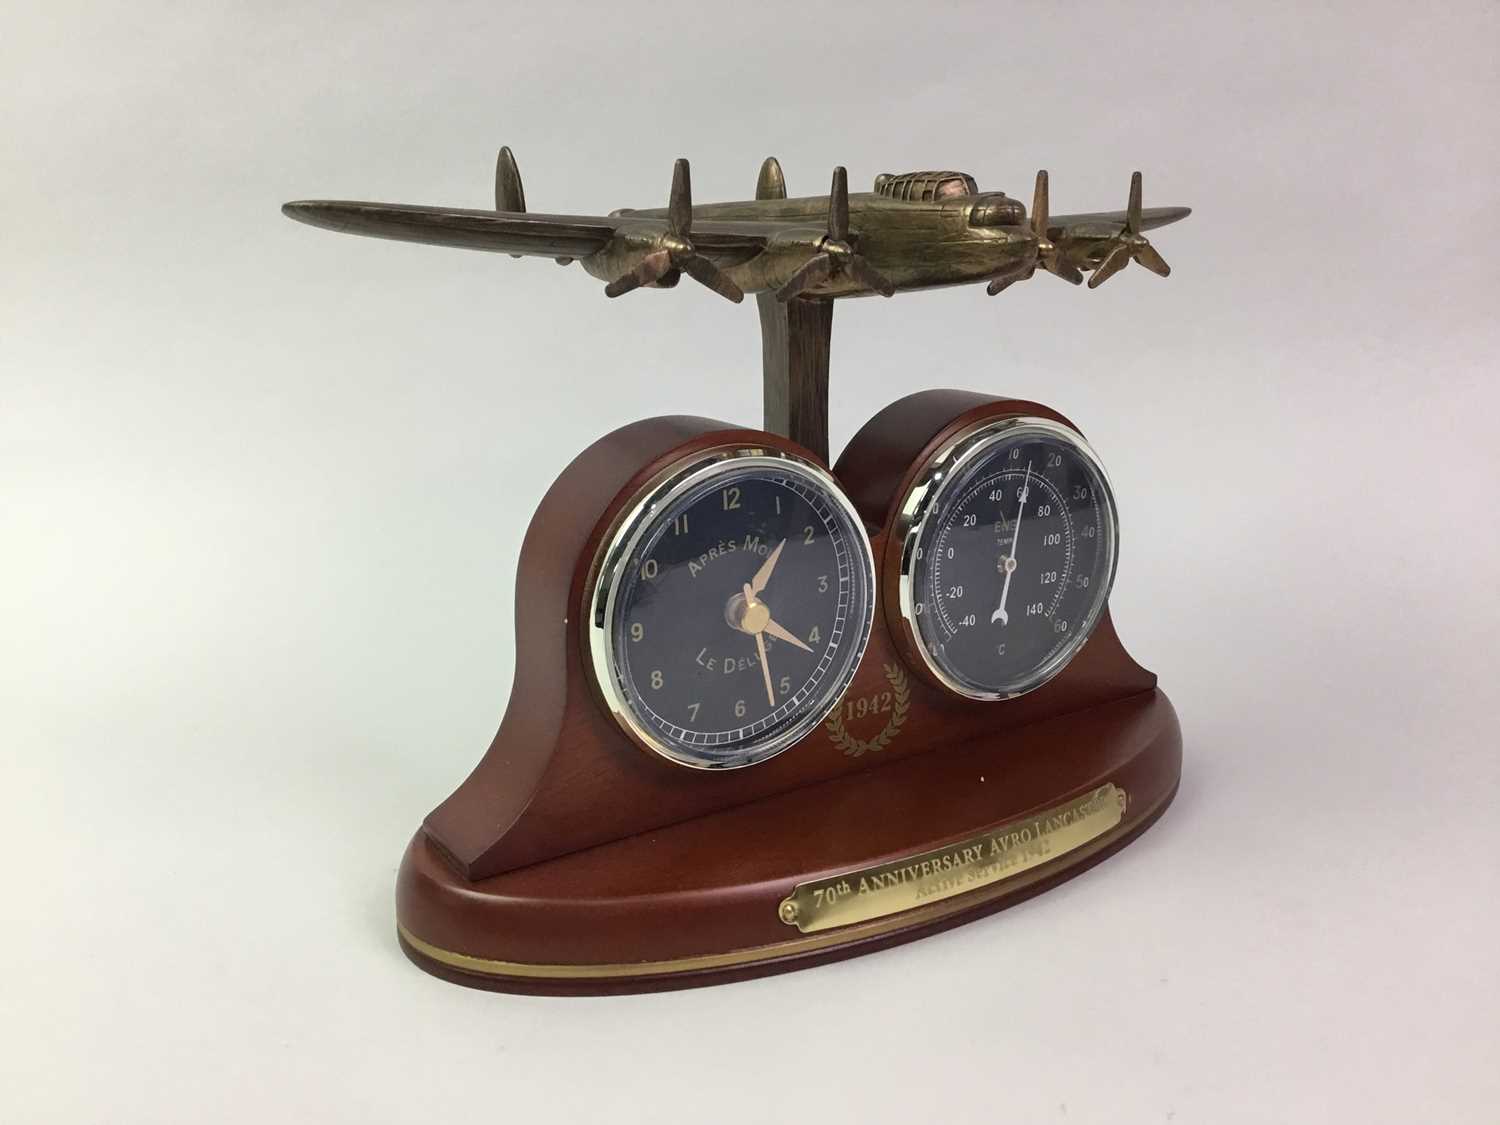 70TH ANNIVERSARY AVRO LANCASTER ACTIVE SERVICE WEATHER STATION,